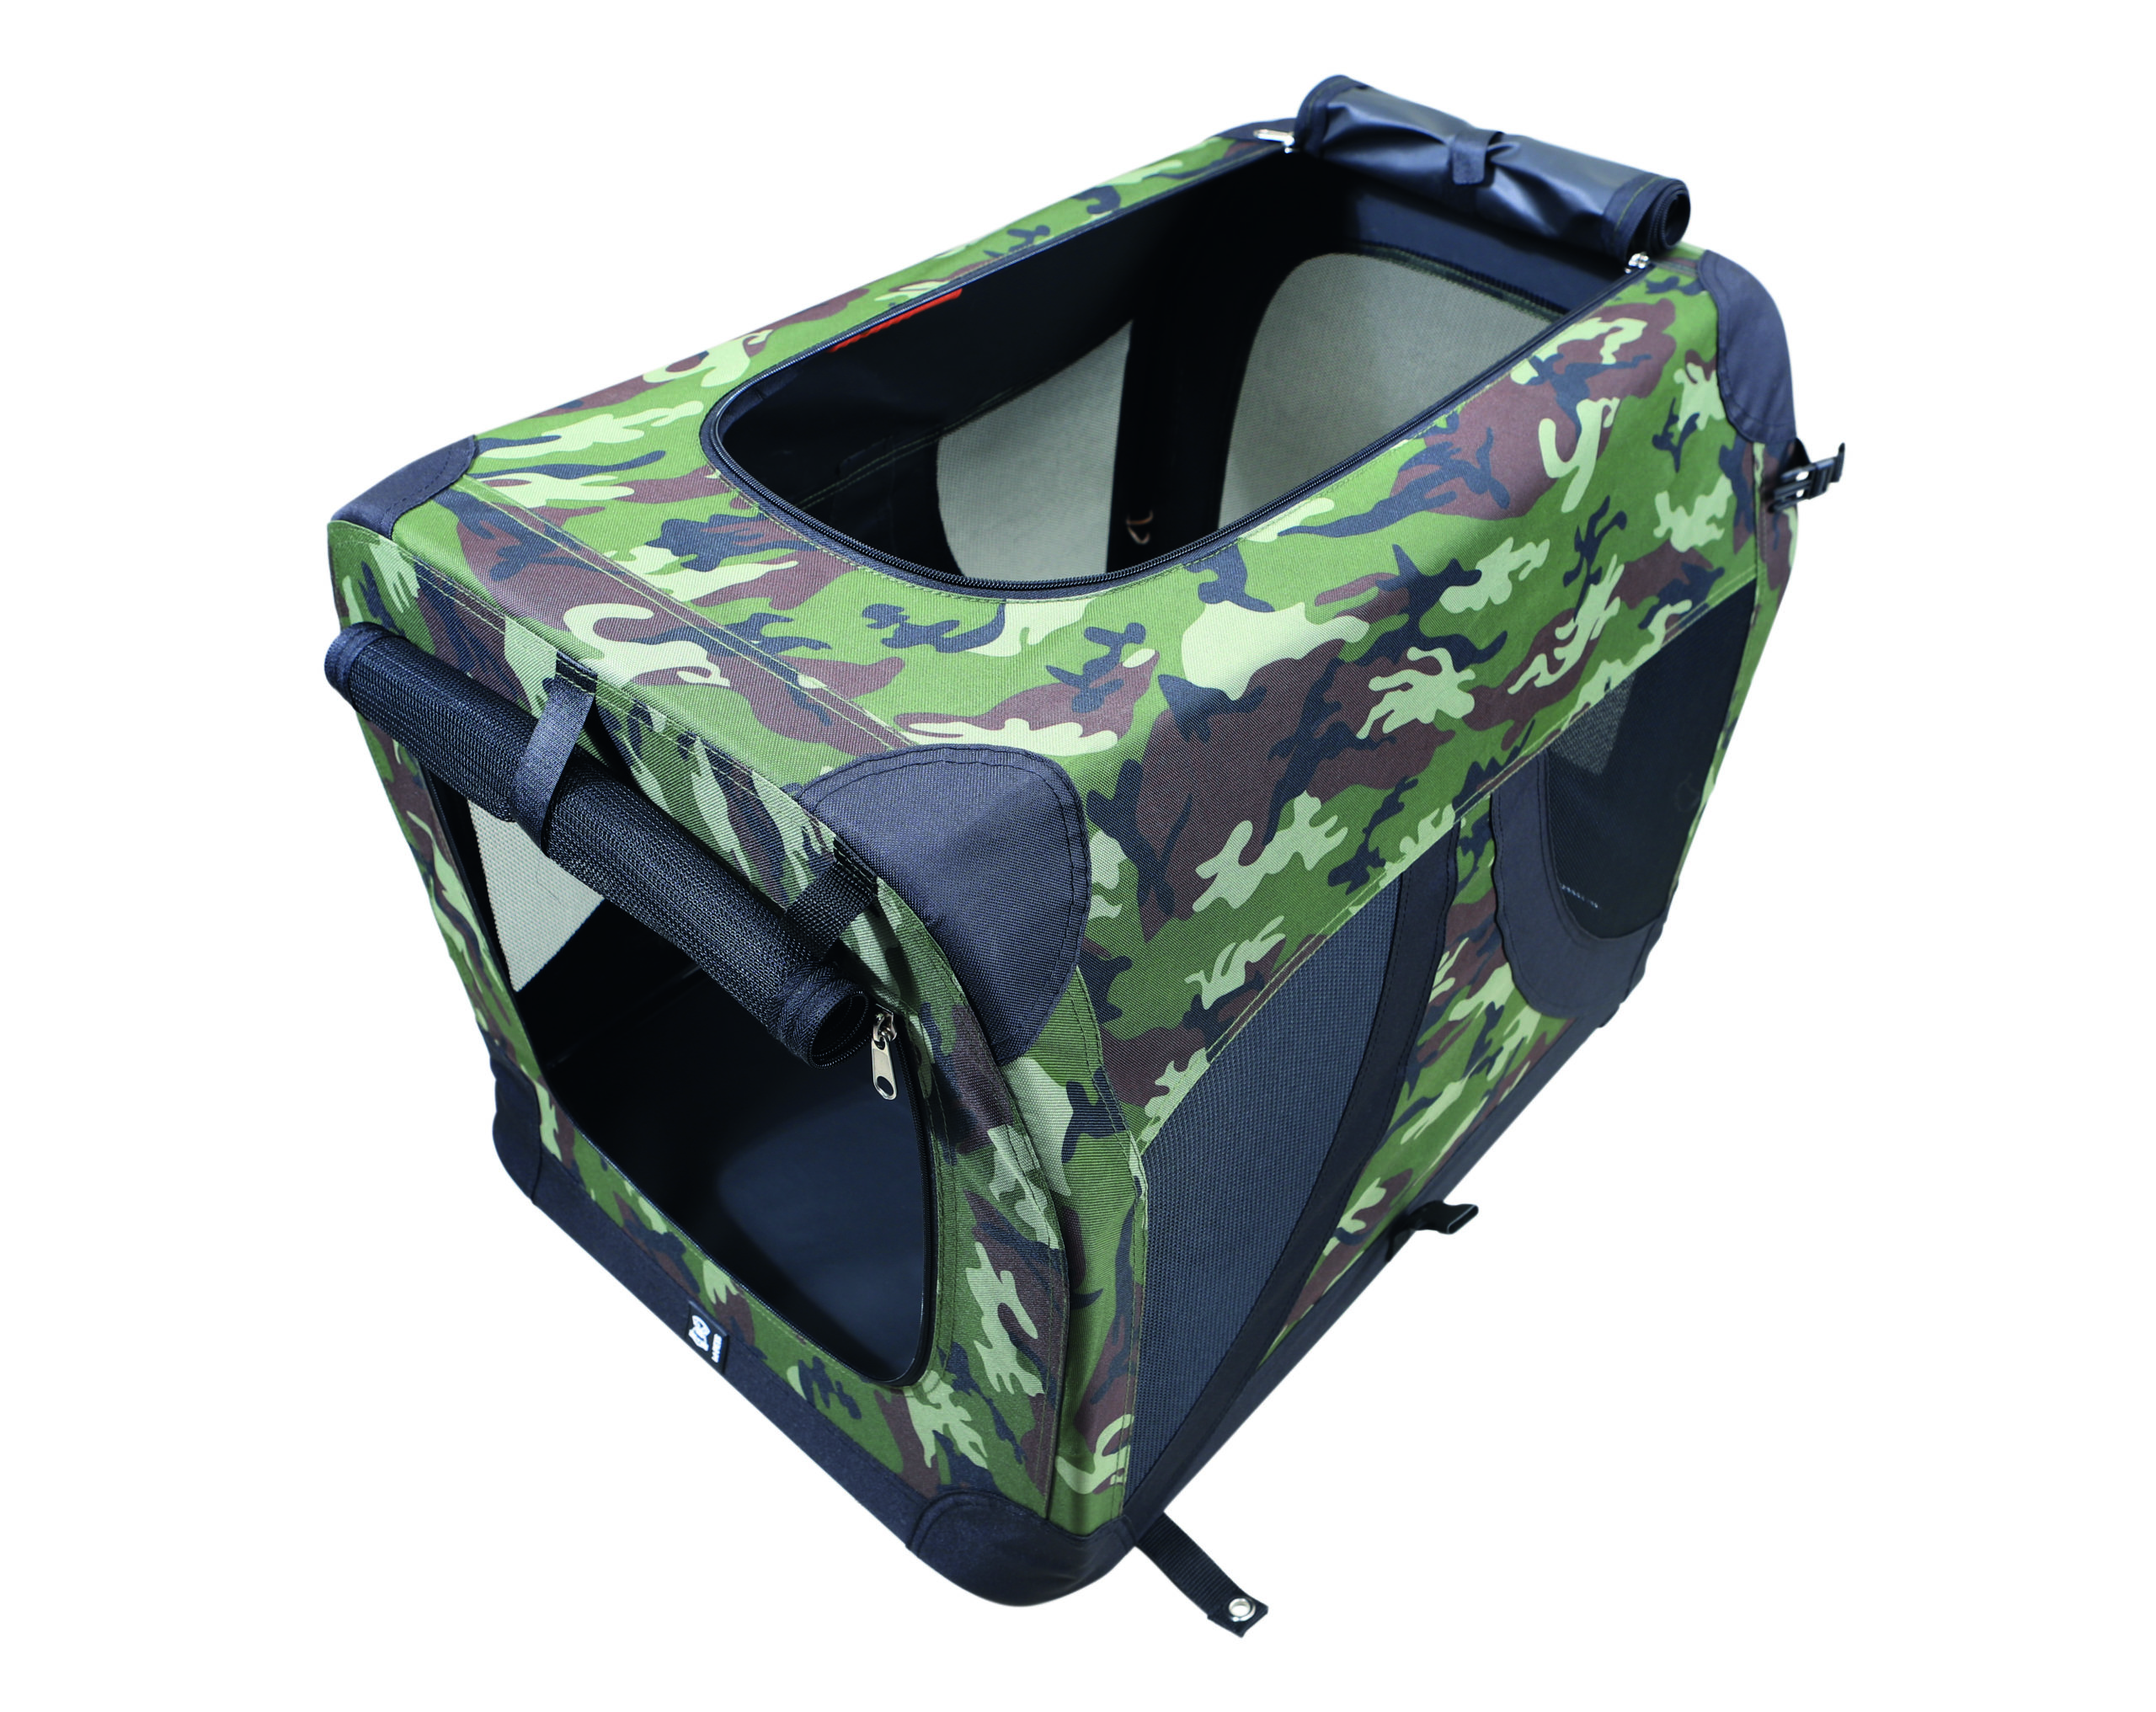 M-PETS_10703399_COMFORT CRATE Camouflage_L_2